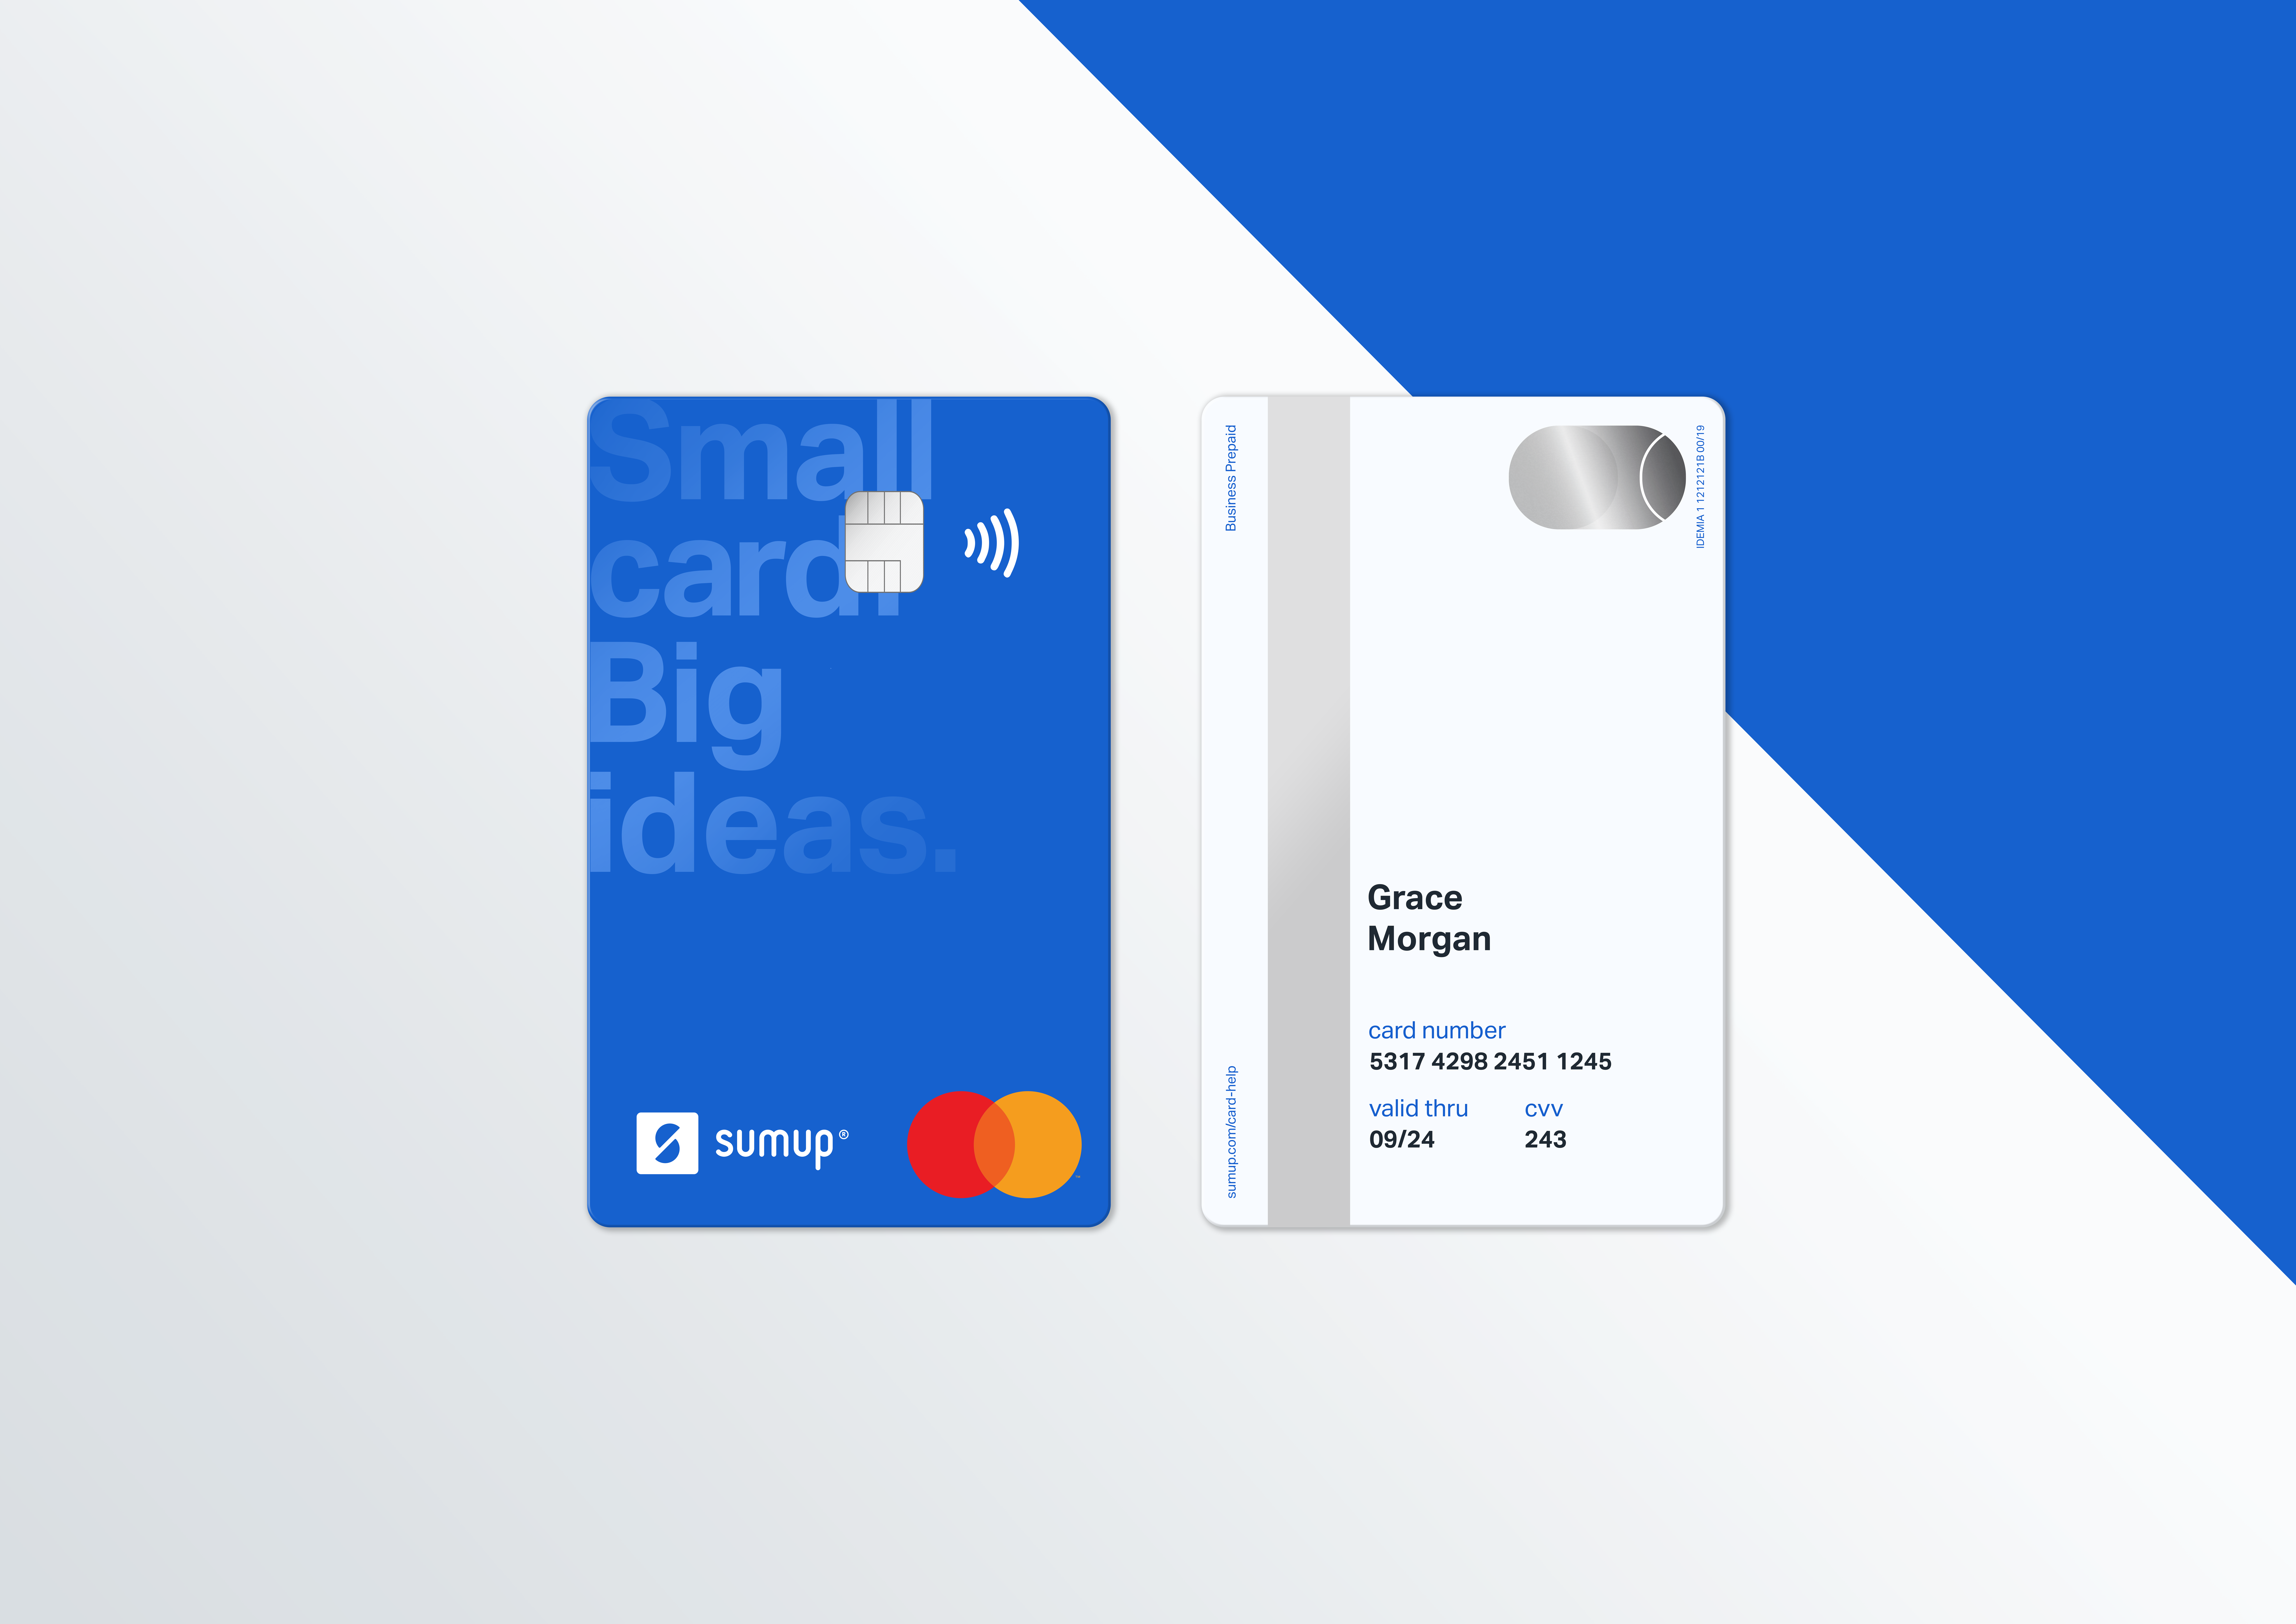 SumUp launches Mastercard-powered 'SumUp Card' for business payments